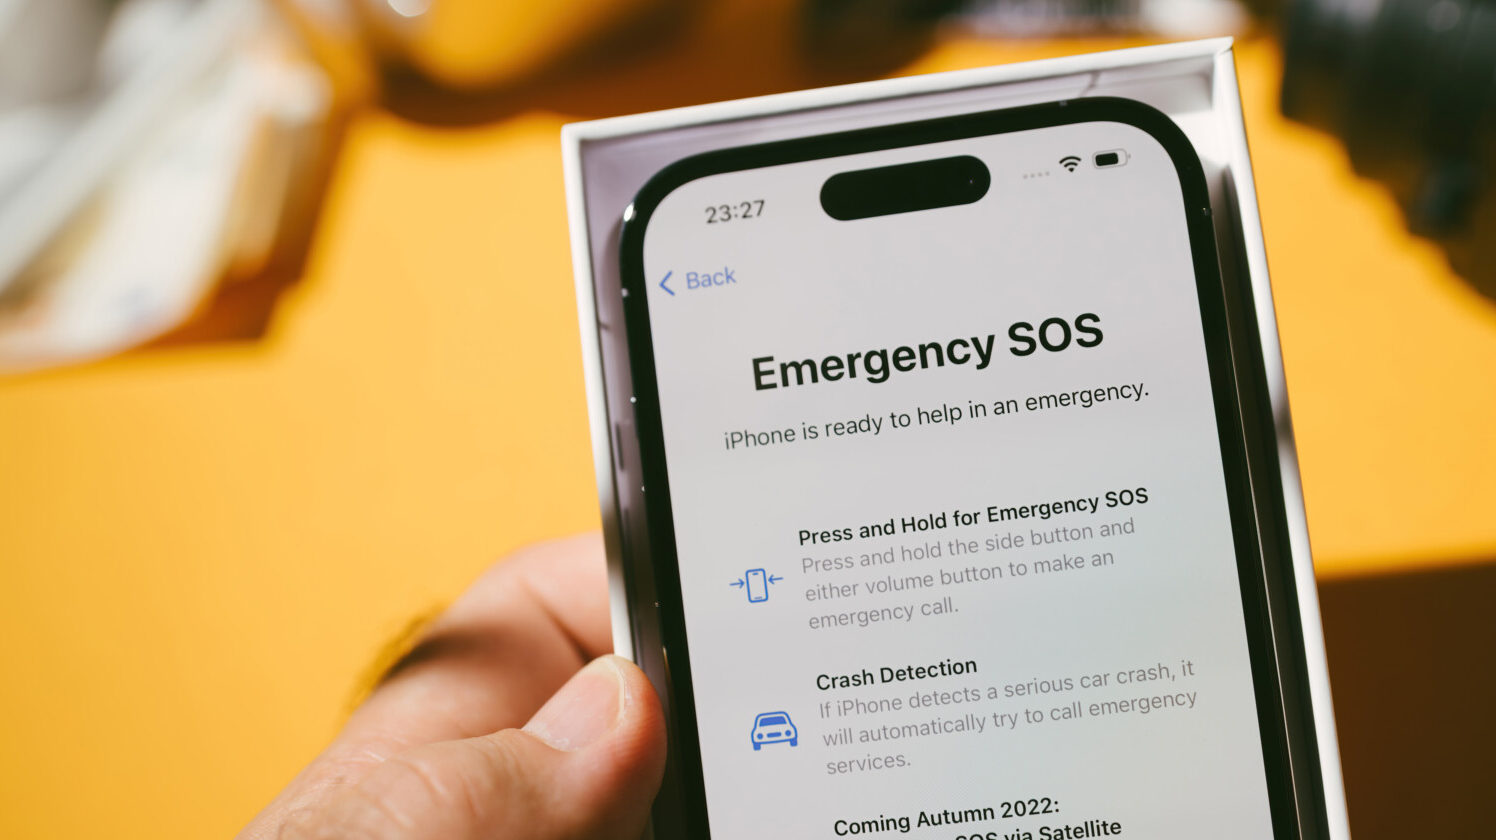 iPhone shows Emergency SOS screen